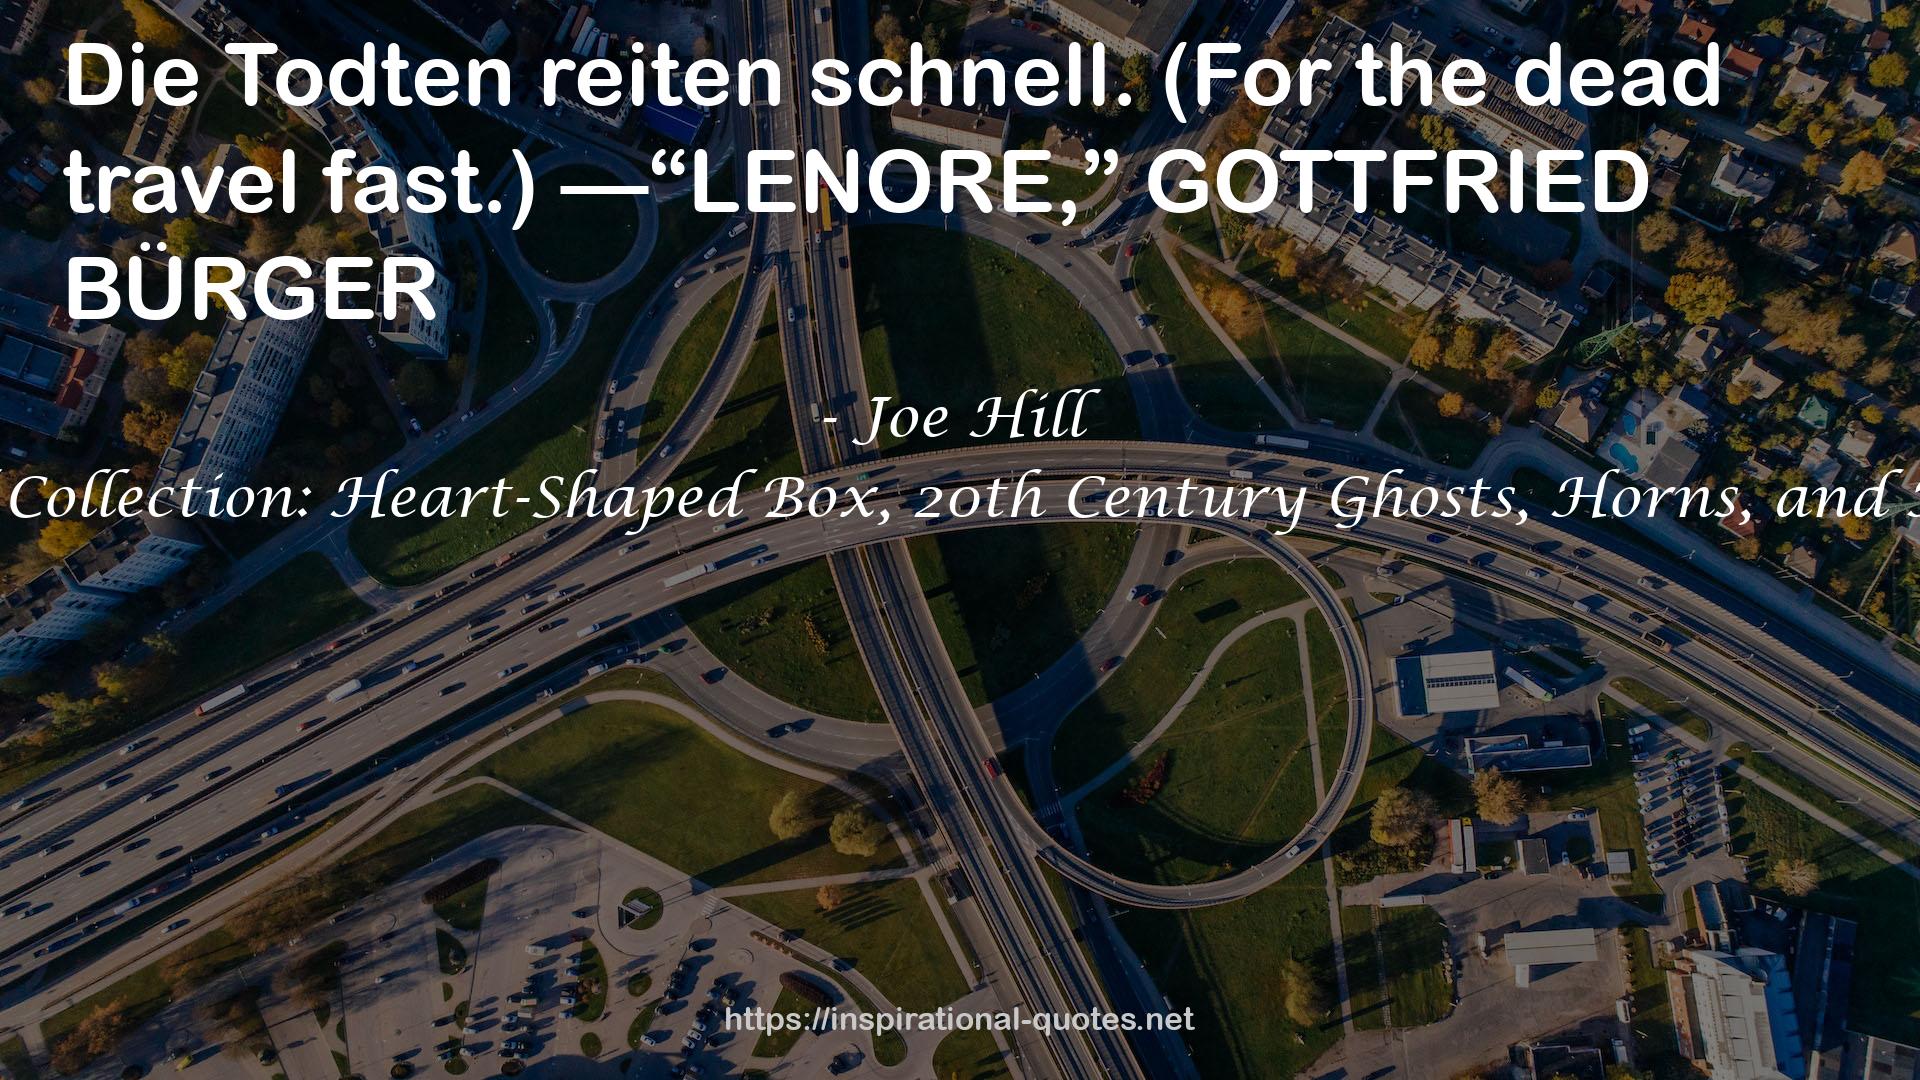 Joe Hill Collection: Heart-Shaped Box, 20th Century Ghosts, Horns, and NOS4A2 QUOTES